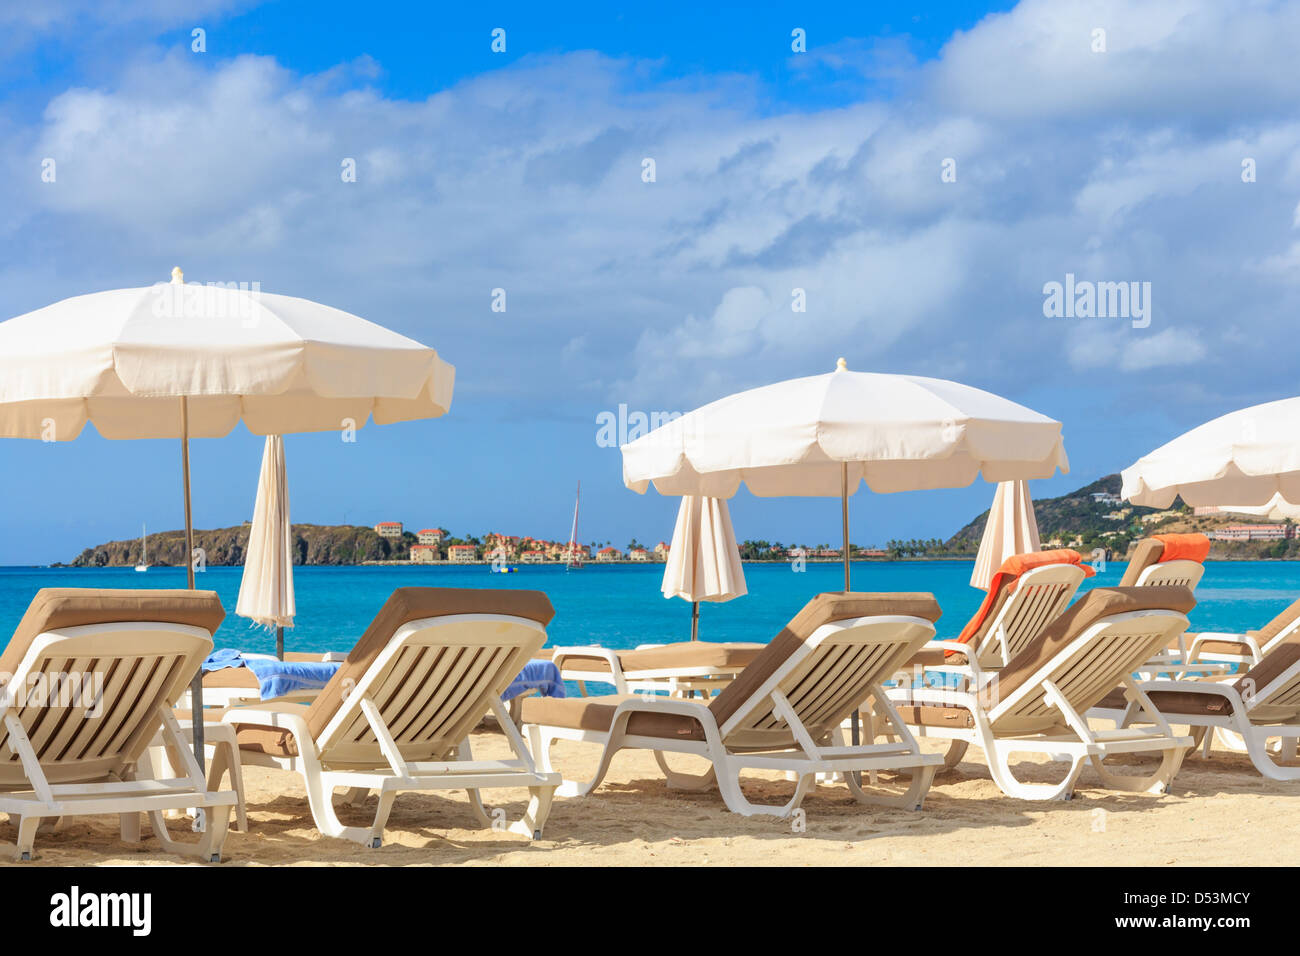 Beach chairs and parasols on a beach in a tropical paradise Stock Photo